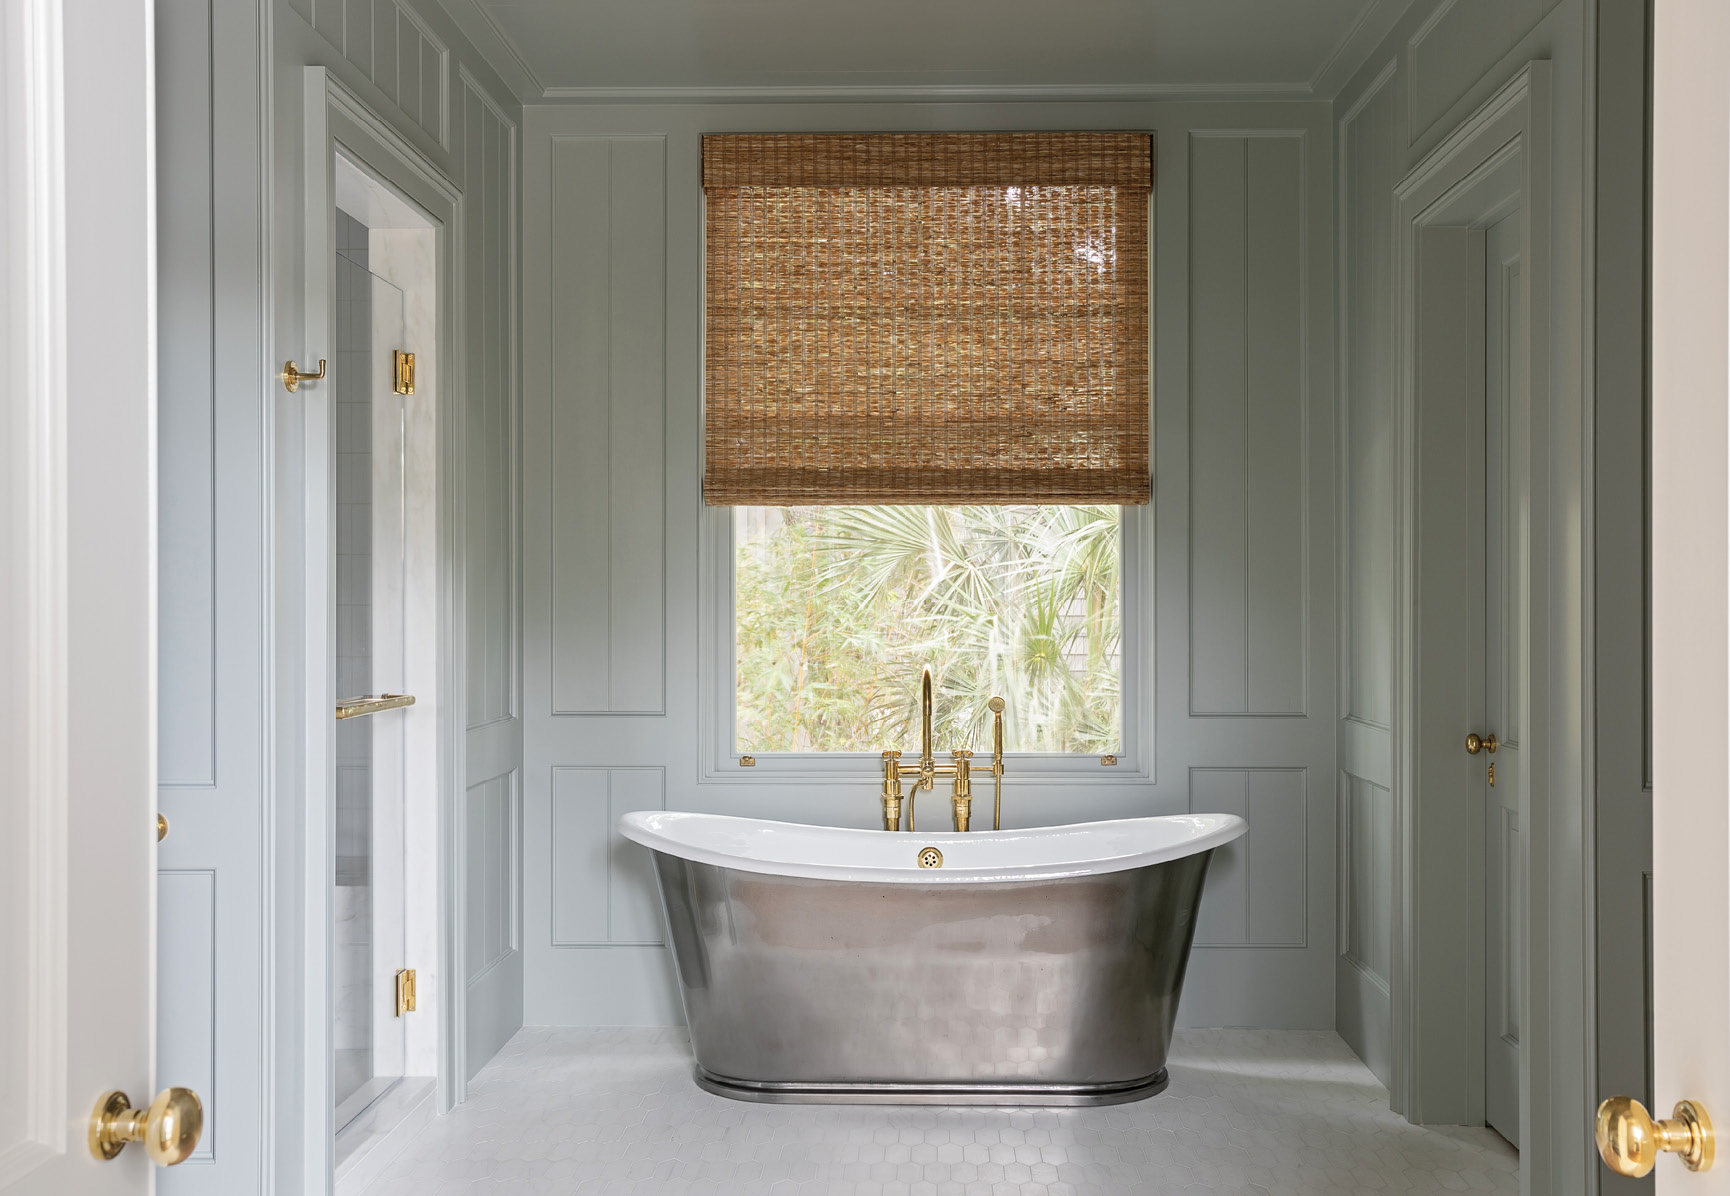 A freestanding cast iron tub from Waterworks with brass fixtures from Bird Hardware is a centerpiece in the panelled room painted in Farrow &amp; Ball “Light Blue.”